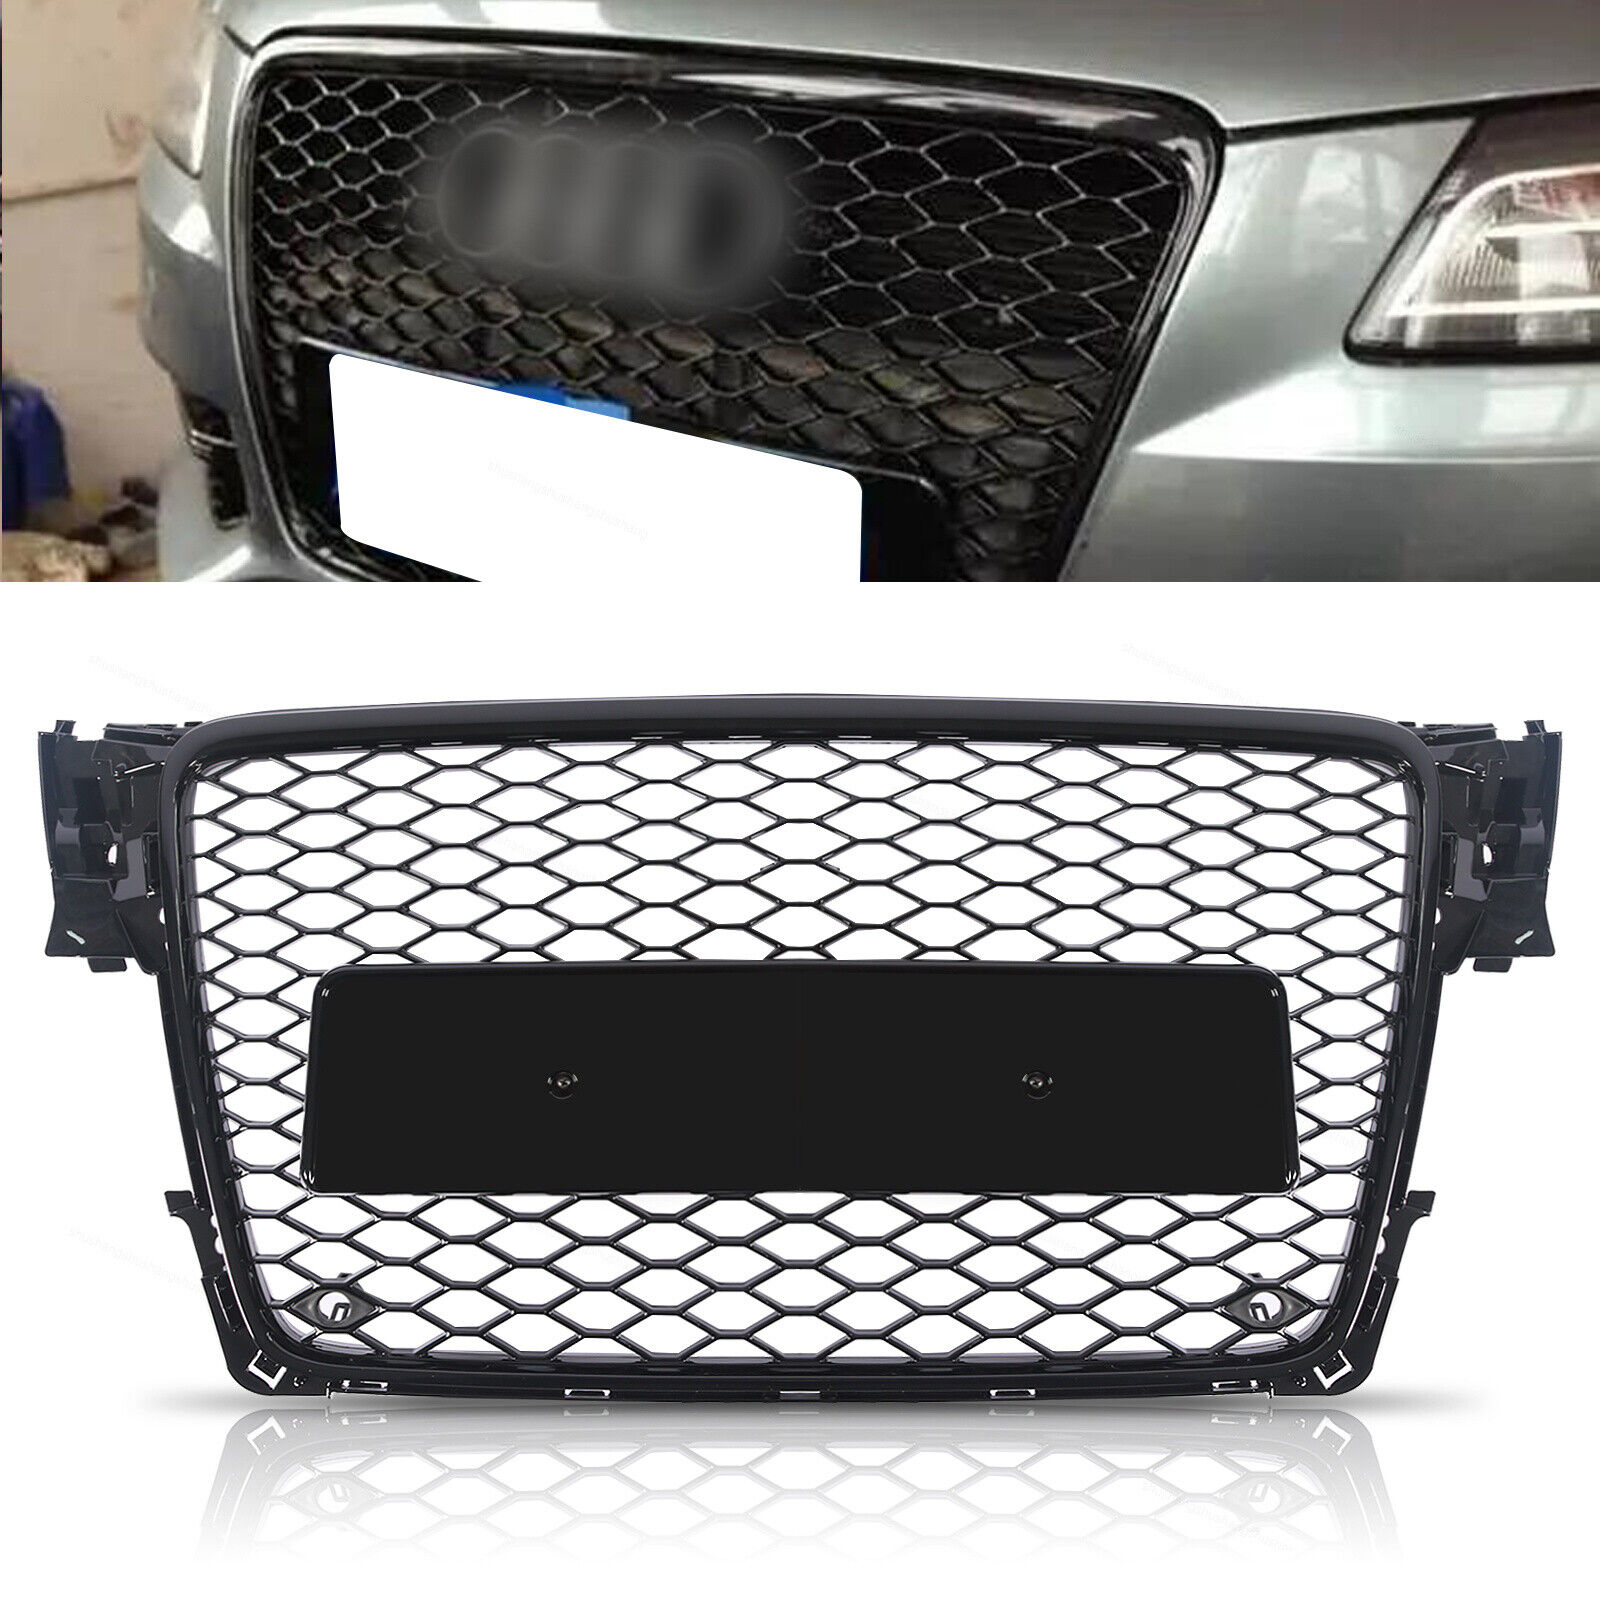 Honeycomb Mesh Grille RS4 Style Black For 2009-2012 Audi A4 Avant / S4 B8 8T